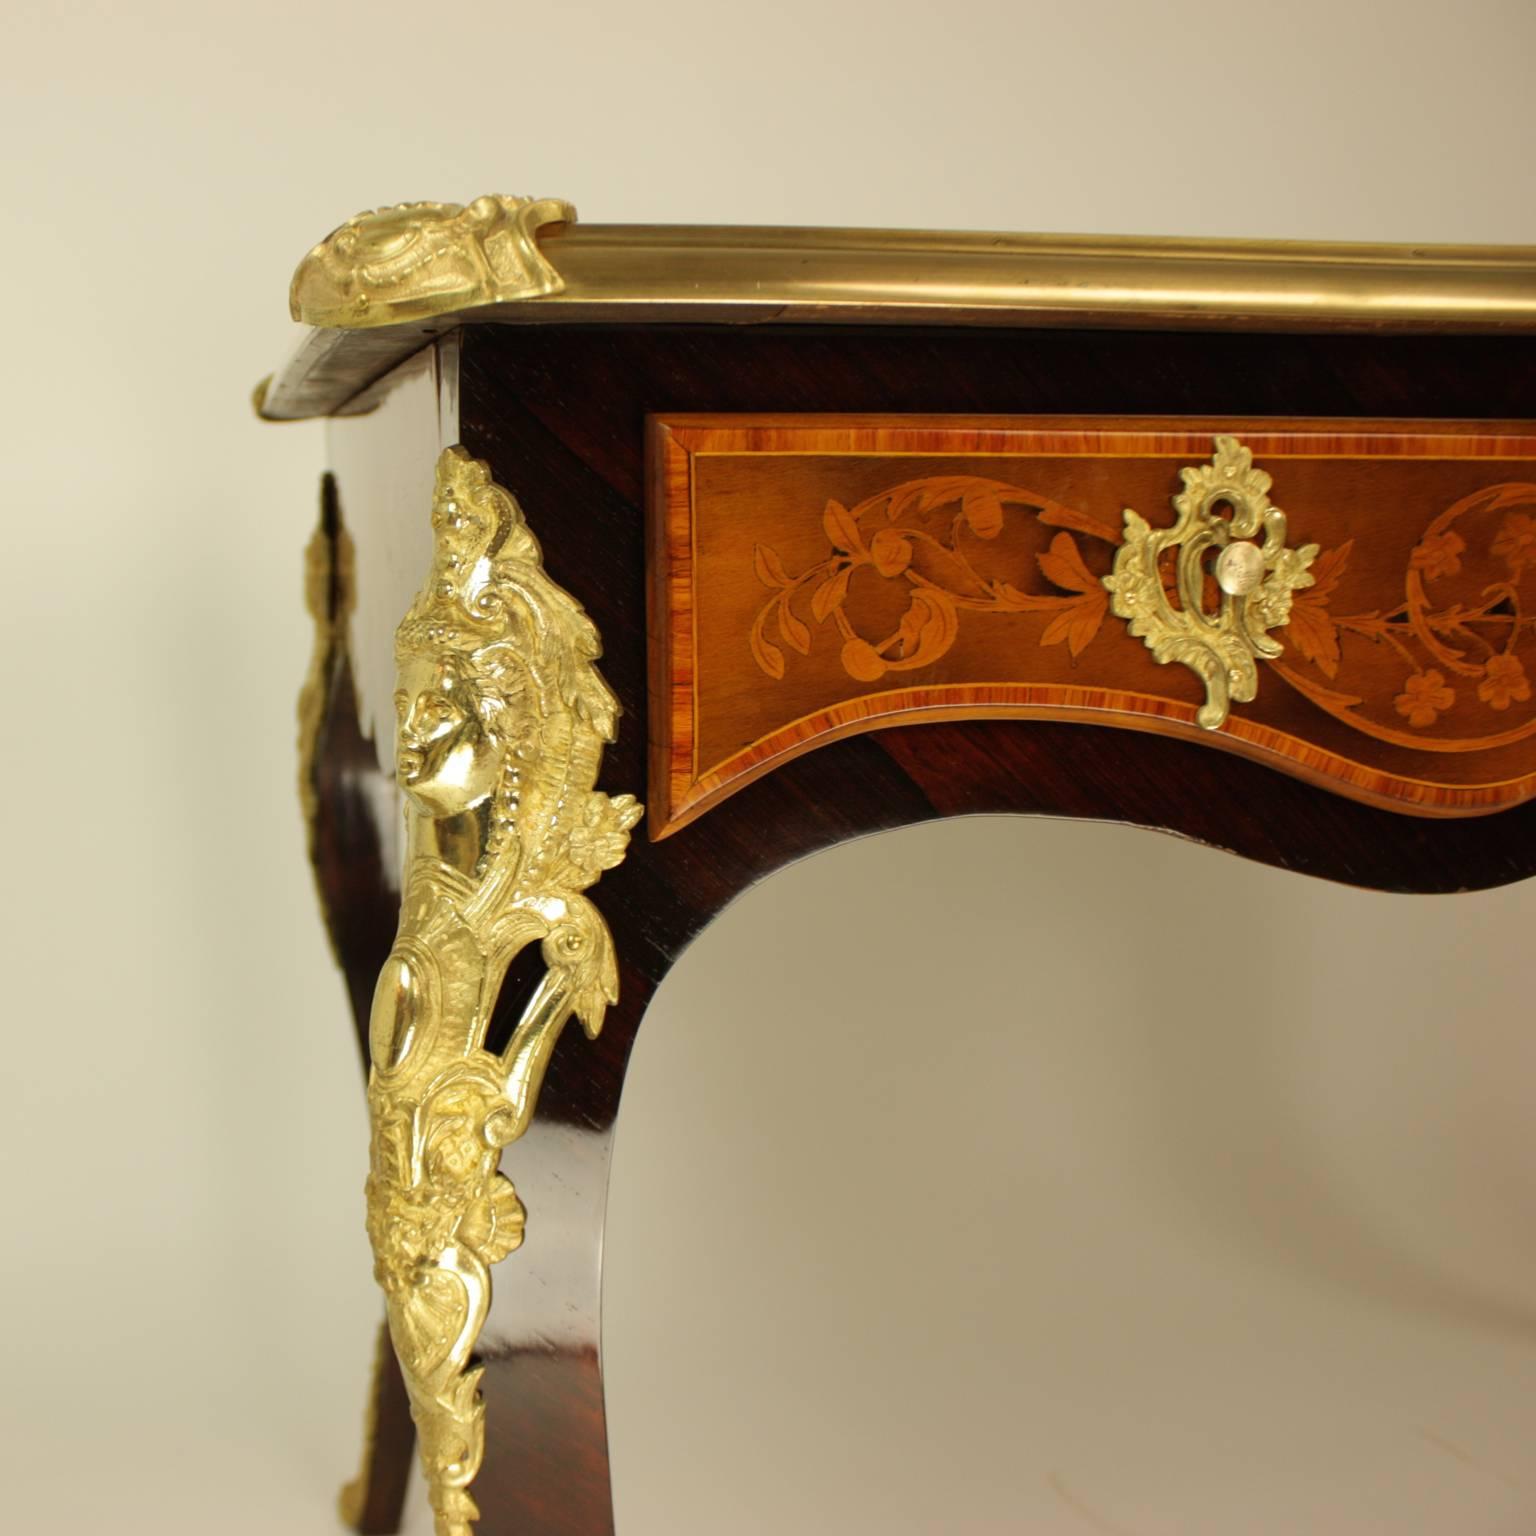 A 19th century gilt-bronze mounted and marquetry desk of freestanding form. With a brass banded rectangular top inset with a fine marquetry surface depicting a central and corner cartouches inlaid with stylised foliate, above three frieze drawers,